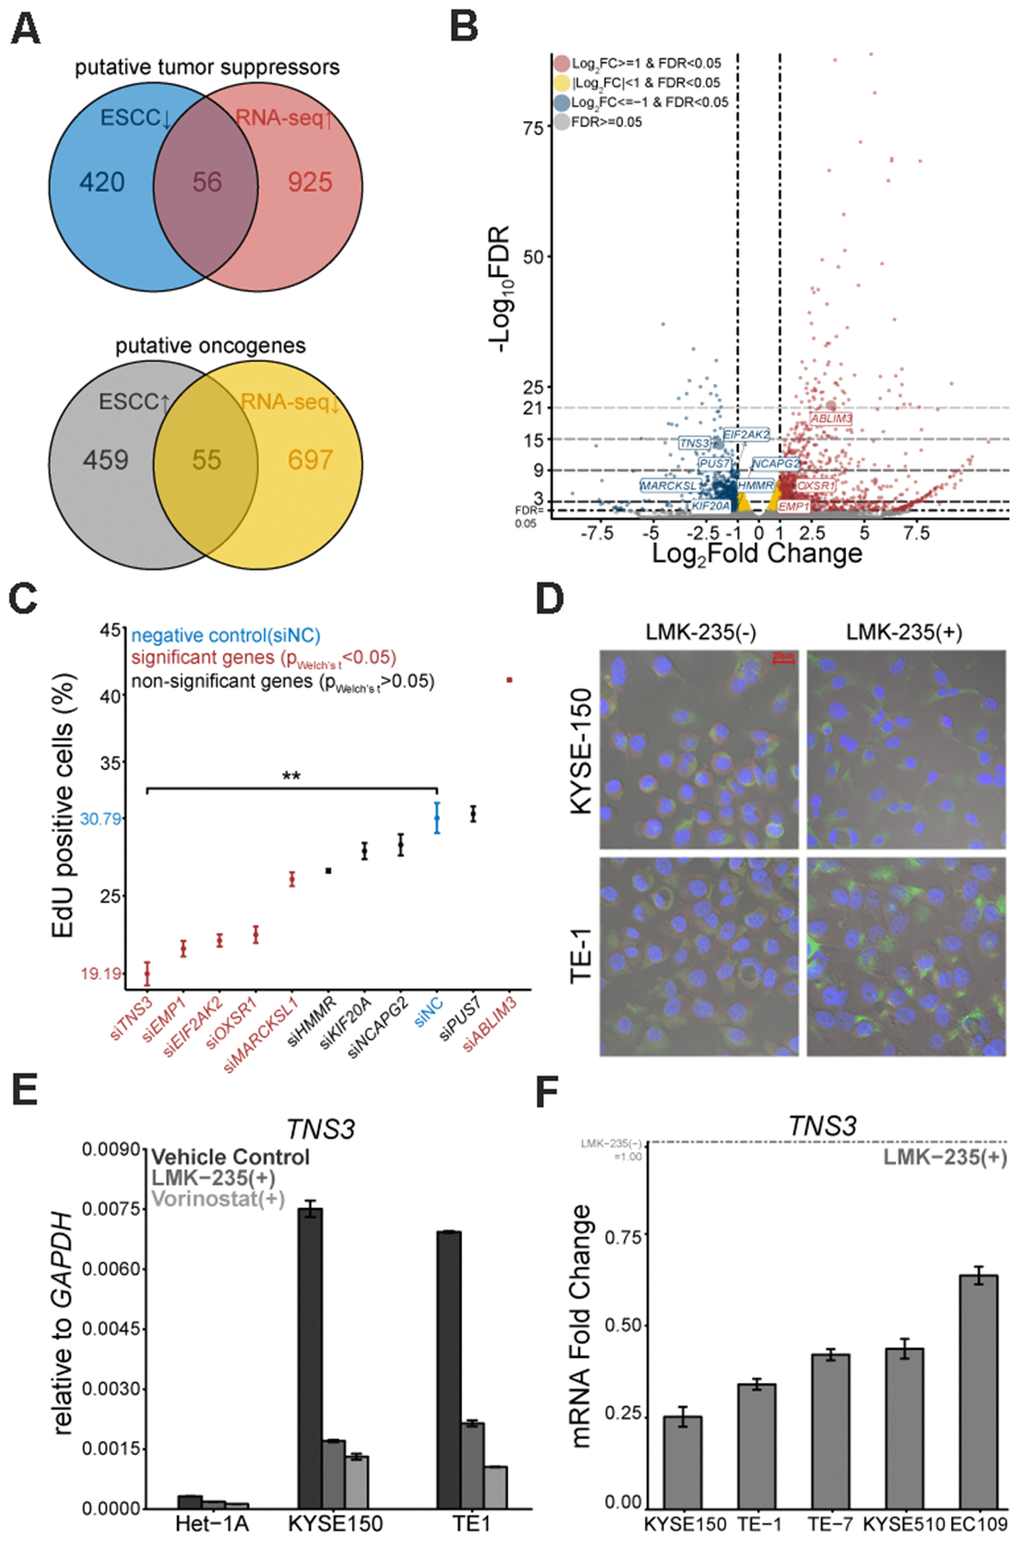 Putative oncogene TNS3 is mitigated by LMK-235. (A) Venn diagrams of the 56 putative tumor suppressors and 55 putative oncogenes. (B) Volcano plot exhibits the DEGs mediated by LMK-235, including the selected 10 genes. (C) Loss-of-function proliferation high-content based siRNA screen of the selected 10 genes. (D) Immunofluorescence of TNS3 in KYSE150 and TE-1, treated with LMK-235. Red: TNS3, Green: α-Tubulin, Blue: DAPI. Scale bar = 20 μm. (E) qRT-PCR analysis of TNS3 expression in Het-1A, TE-1, and KYSE150 cells treated with LMK-235 and Vorinostat. Data are normalized to GAPDH. (F) qRT-PCR analysis of TNS3 expression in EC109, KYSE150, KYSE510, TE-1, and TE-7 cells treated with LMK-235. Data are relative to vehicle control and normalized to GAPDH. (C, E, F). Error bar denotes SEM of three replicates.